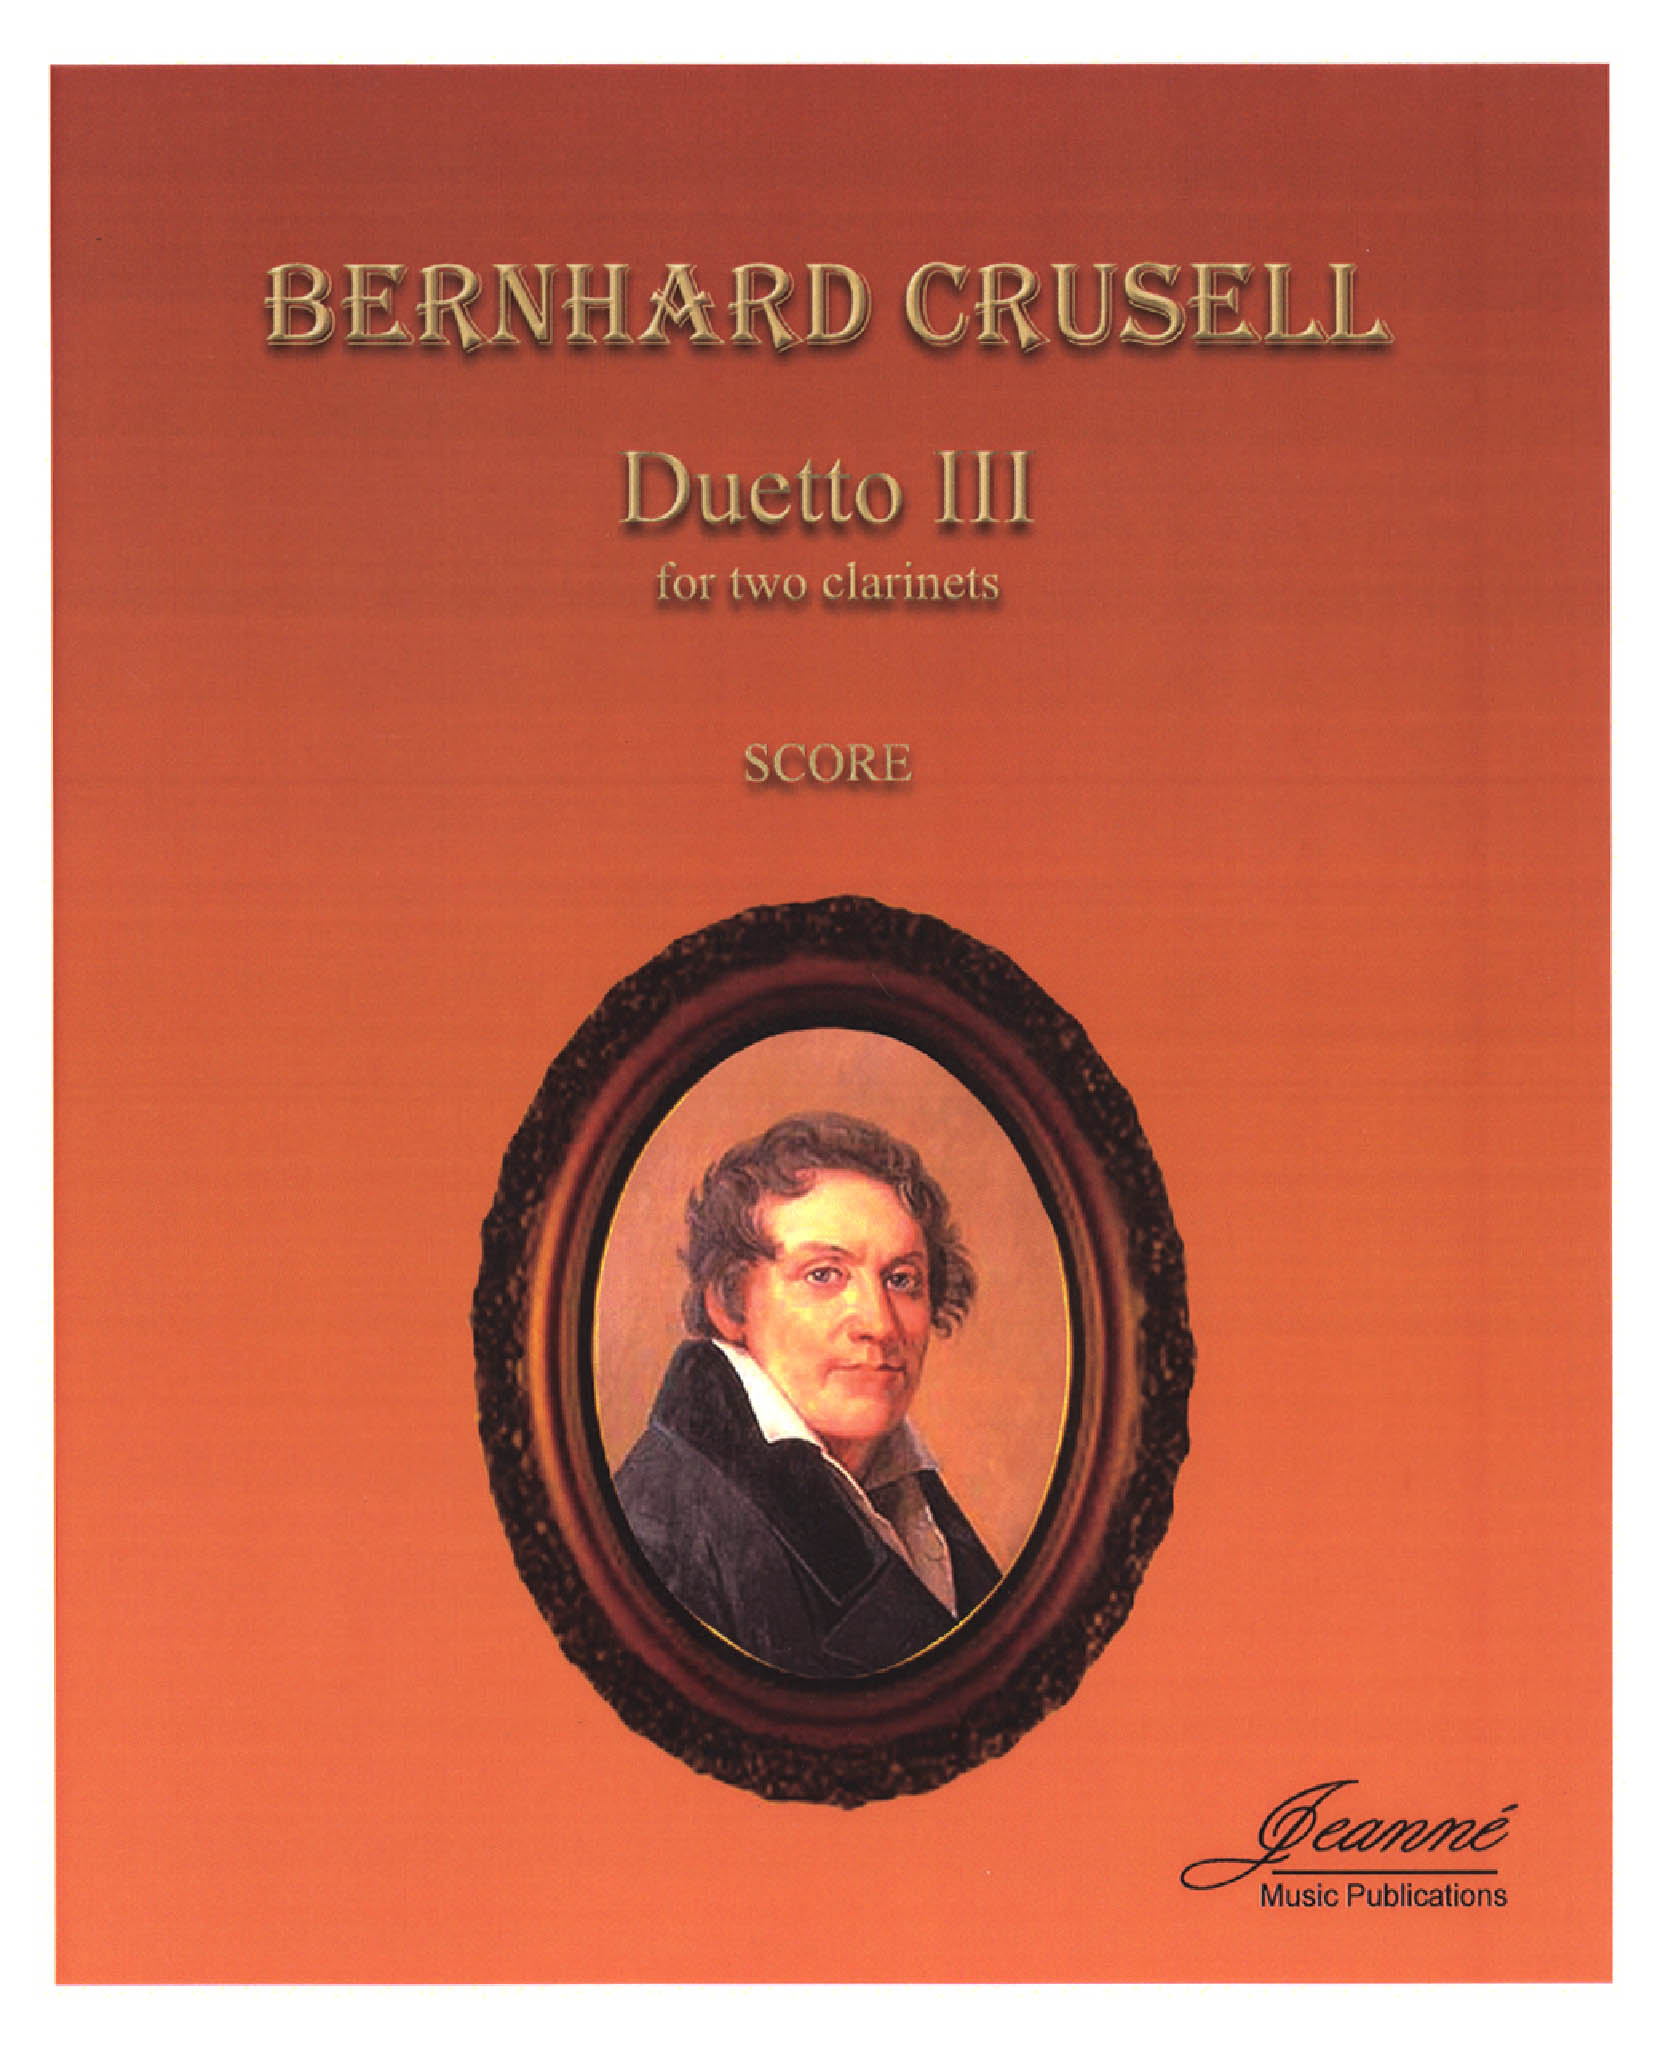 Crusell Clarinet Duet No. 2 in D Minor score cover